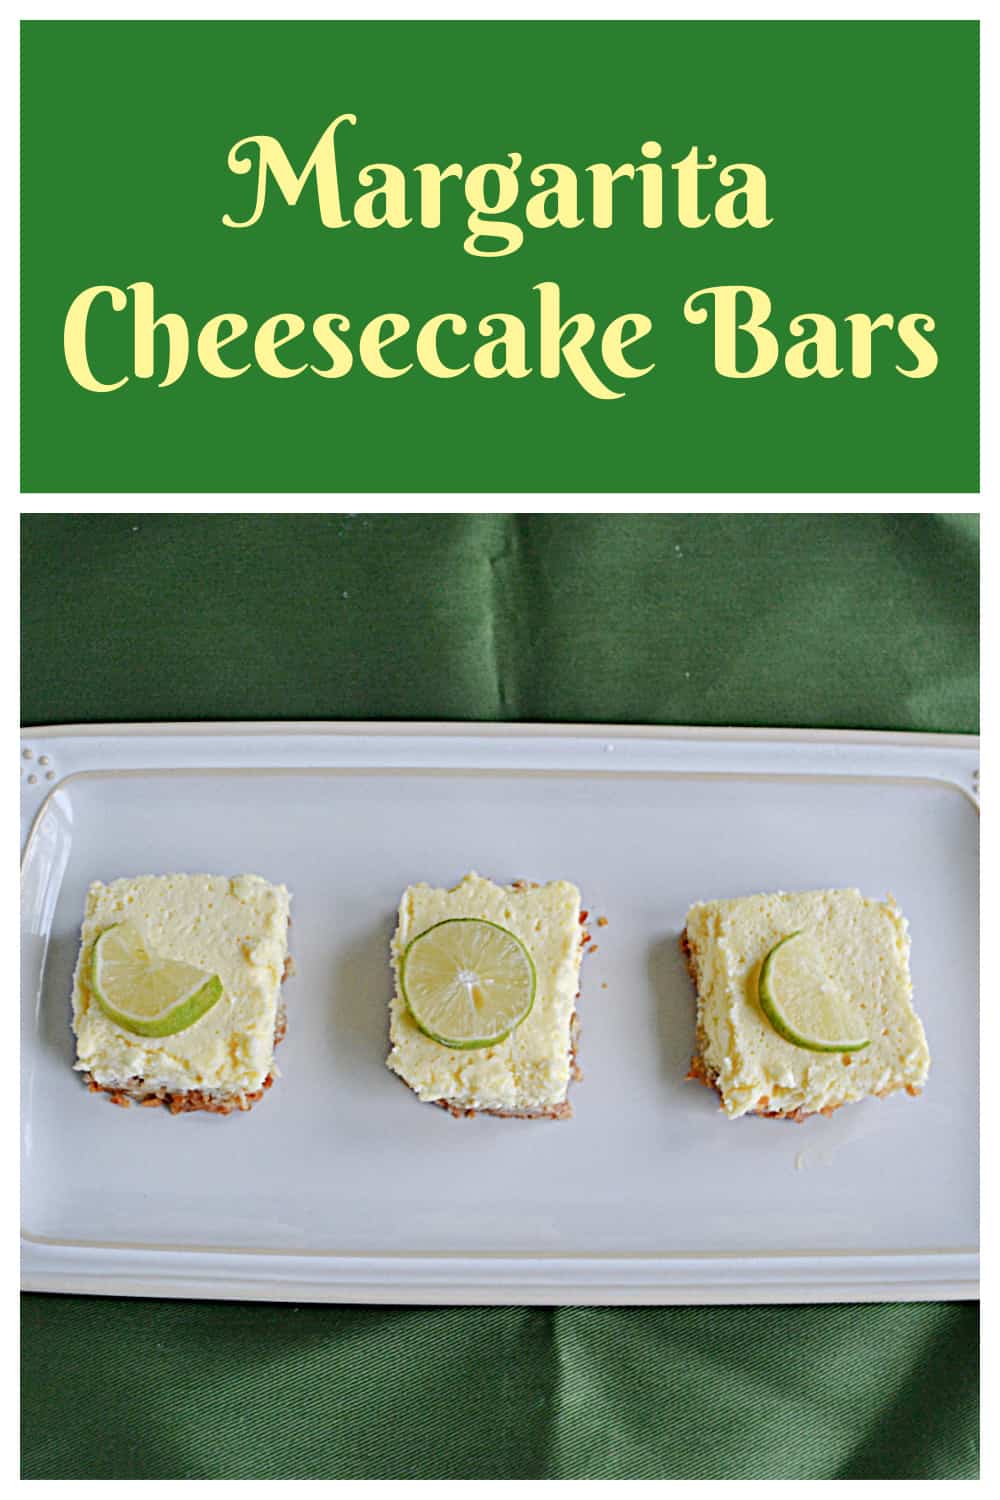 Pin Image:   Text title, a platter with margarita cheesecake bars on it. 